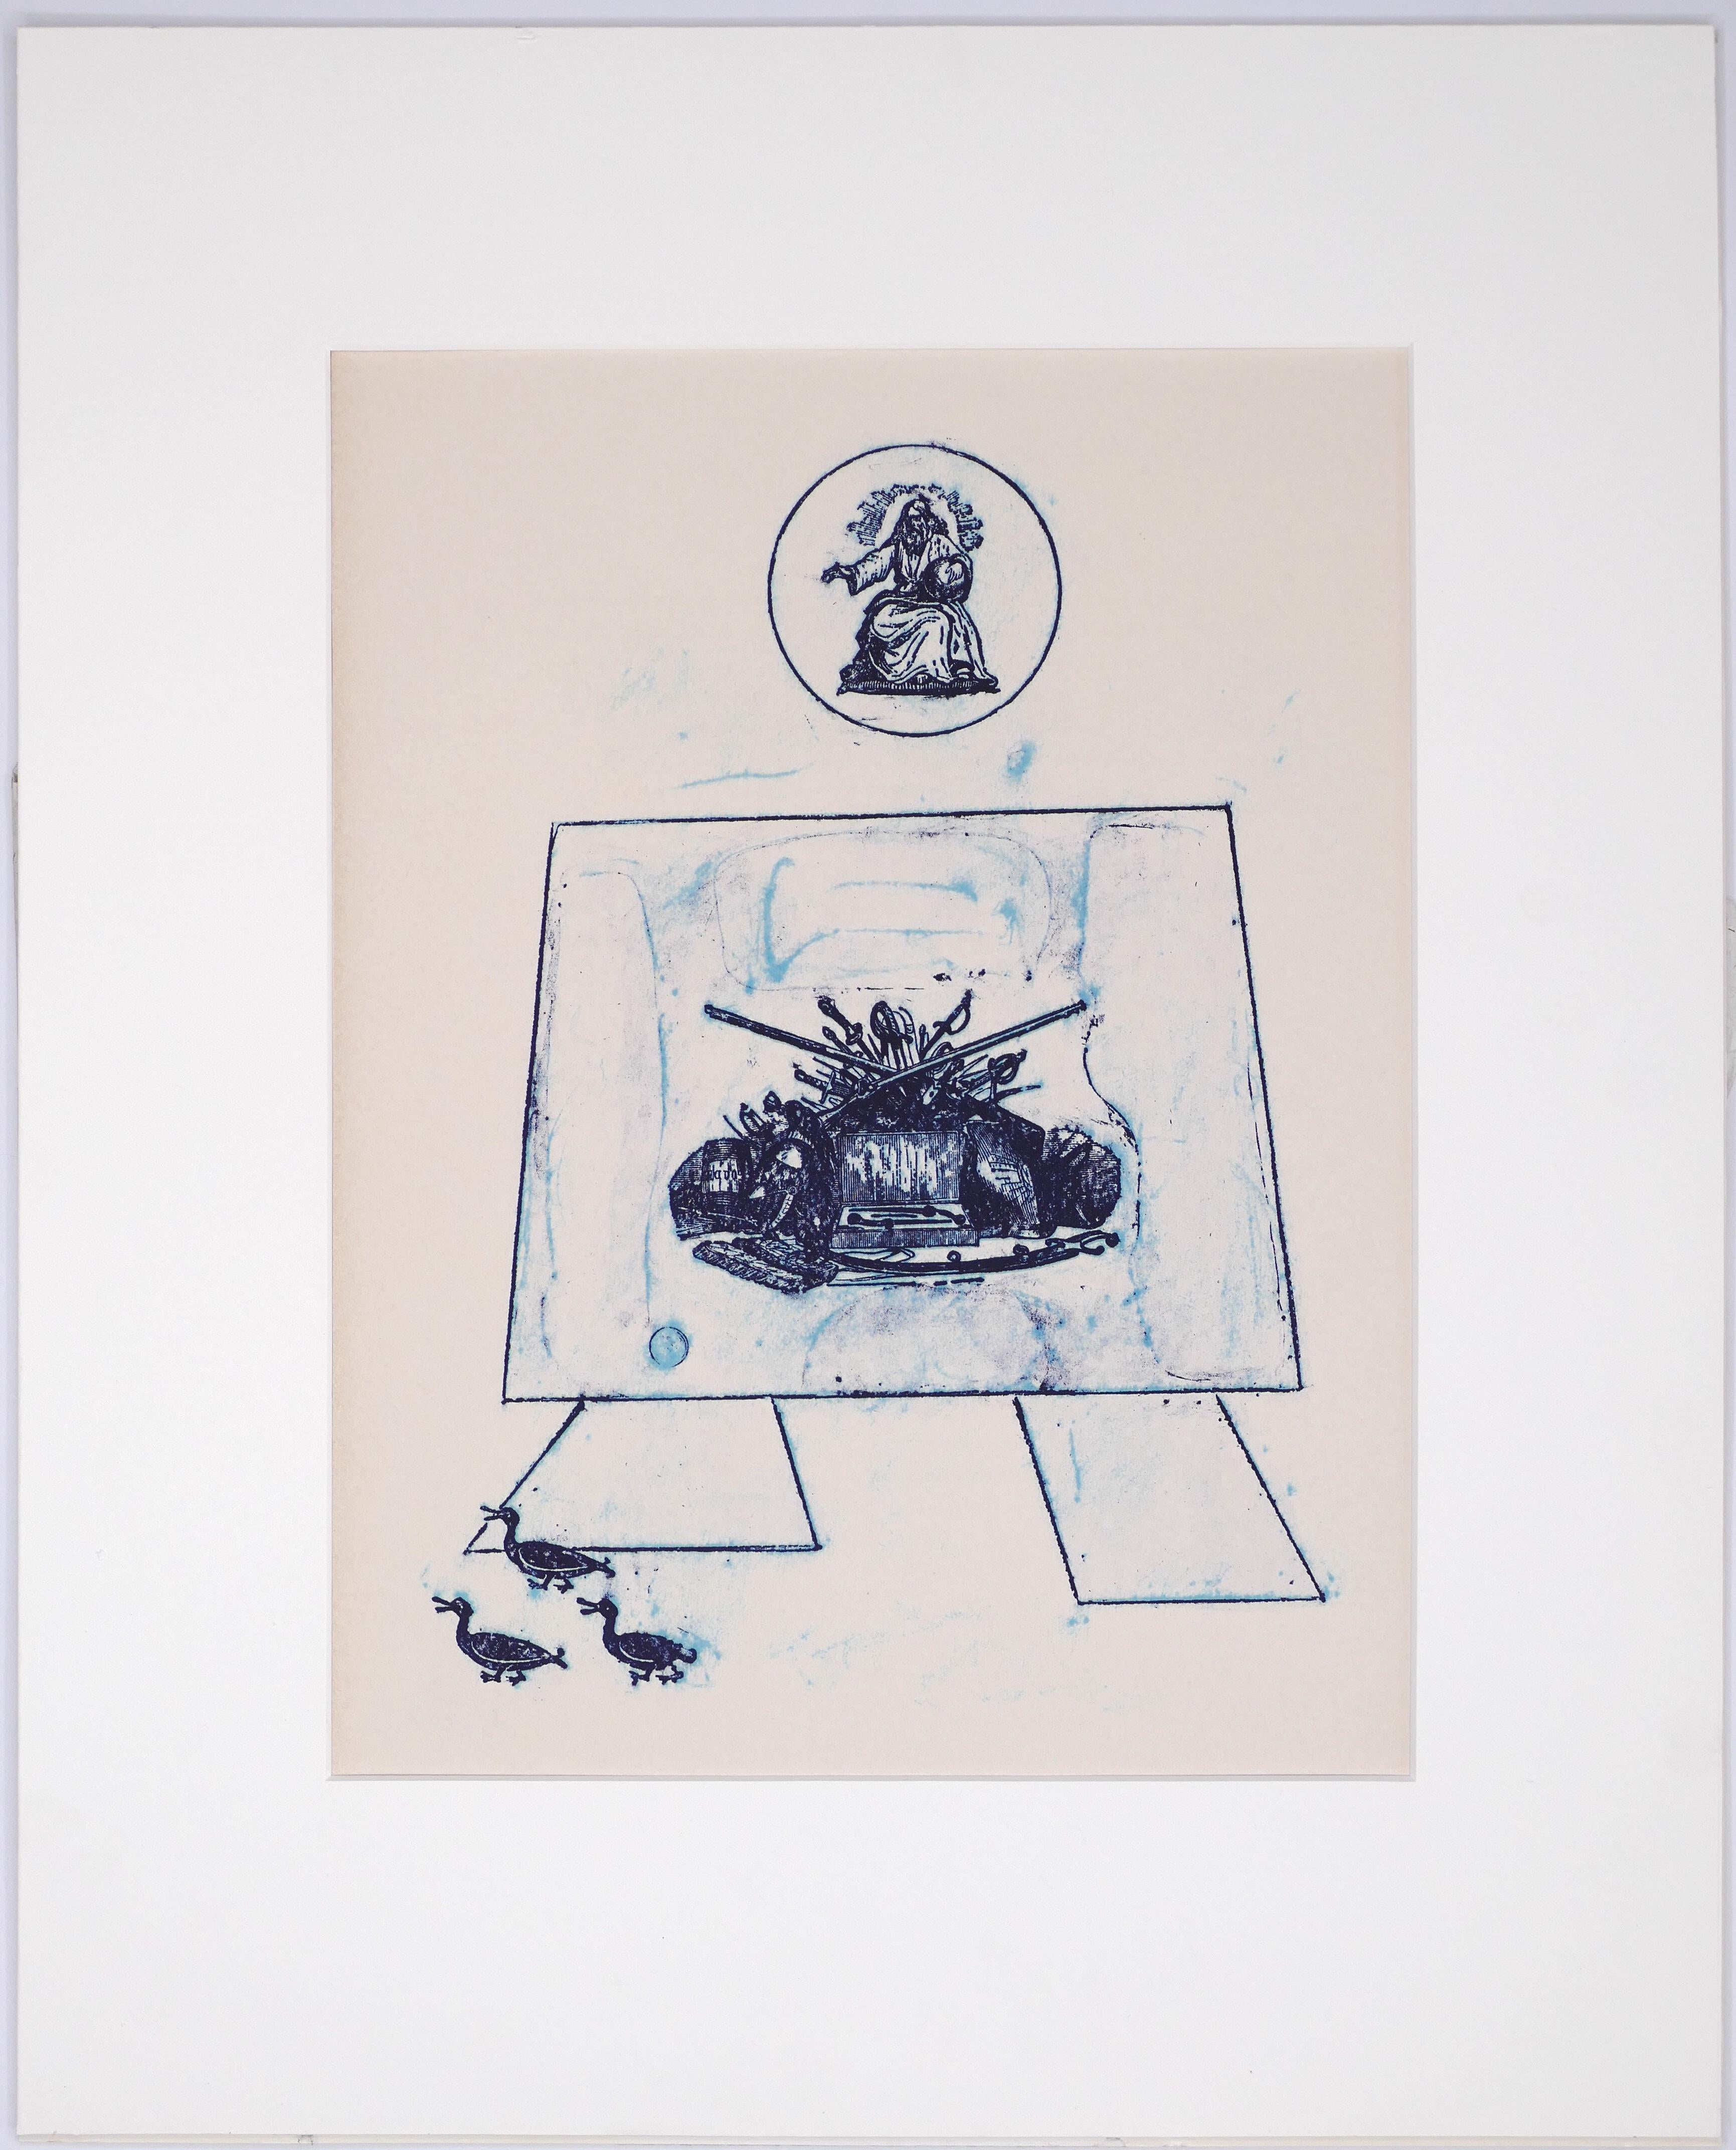 Dance of Soldiers - Original Lithograph by Max Ernst - 1972 1